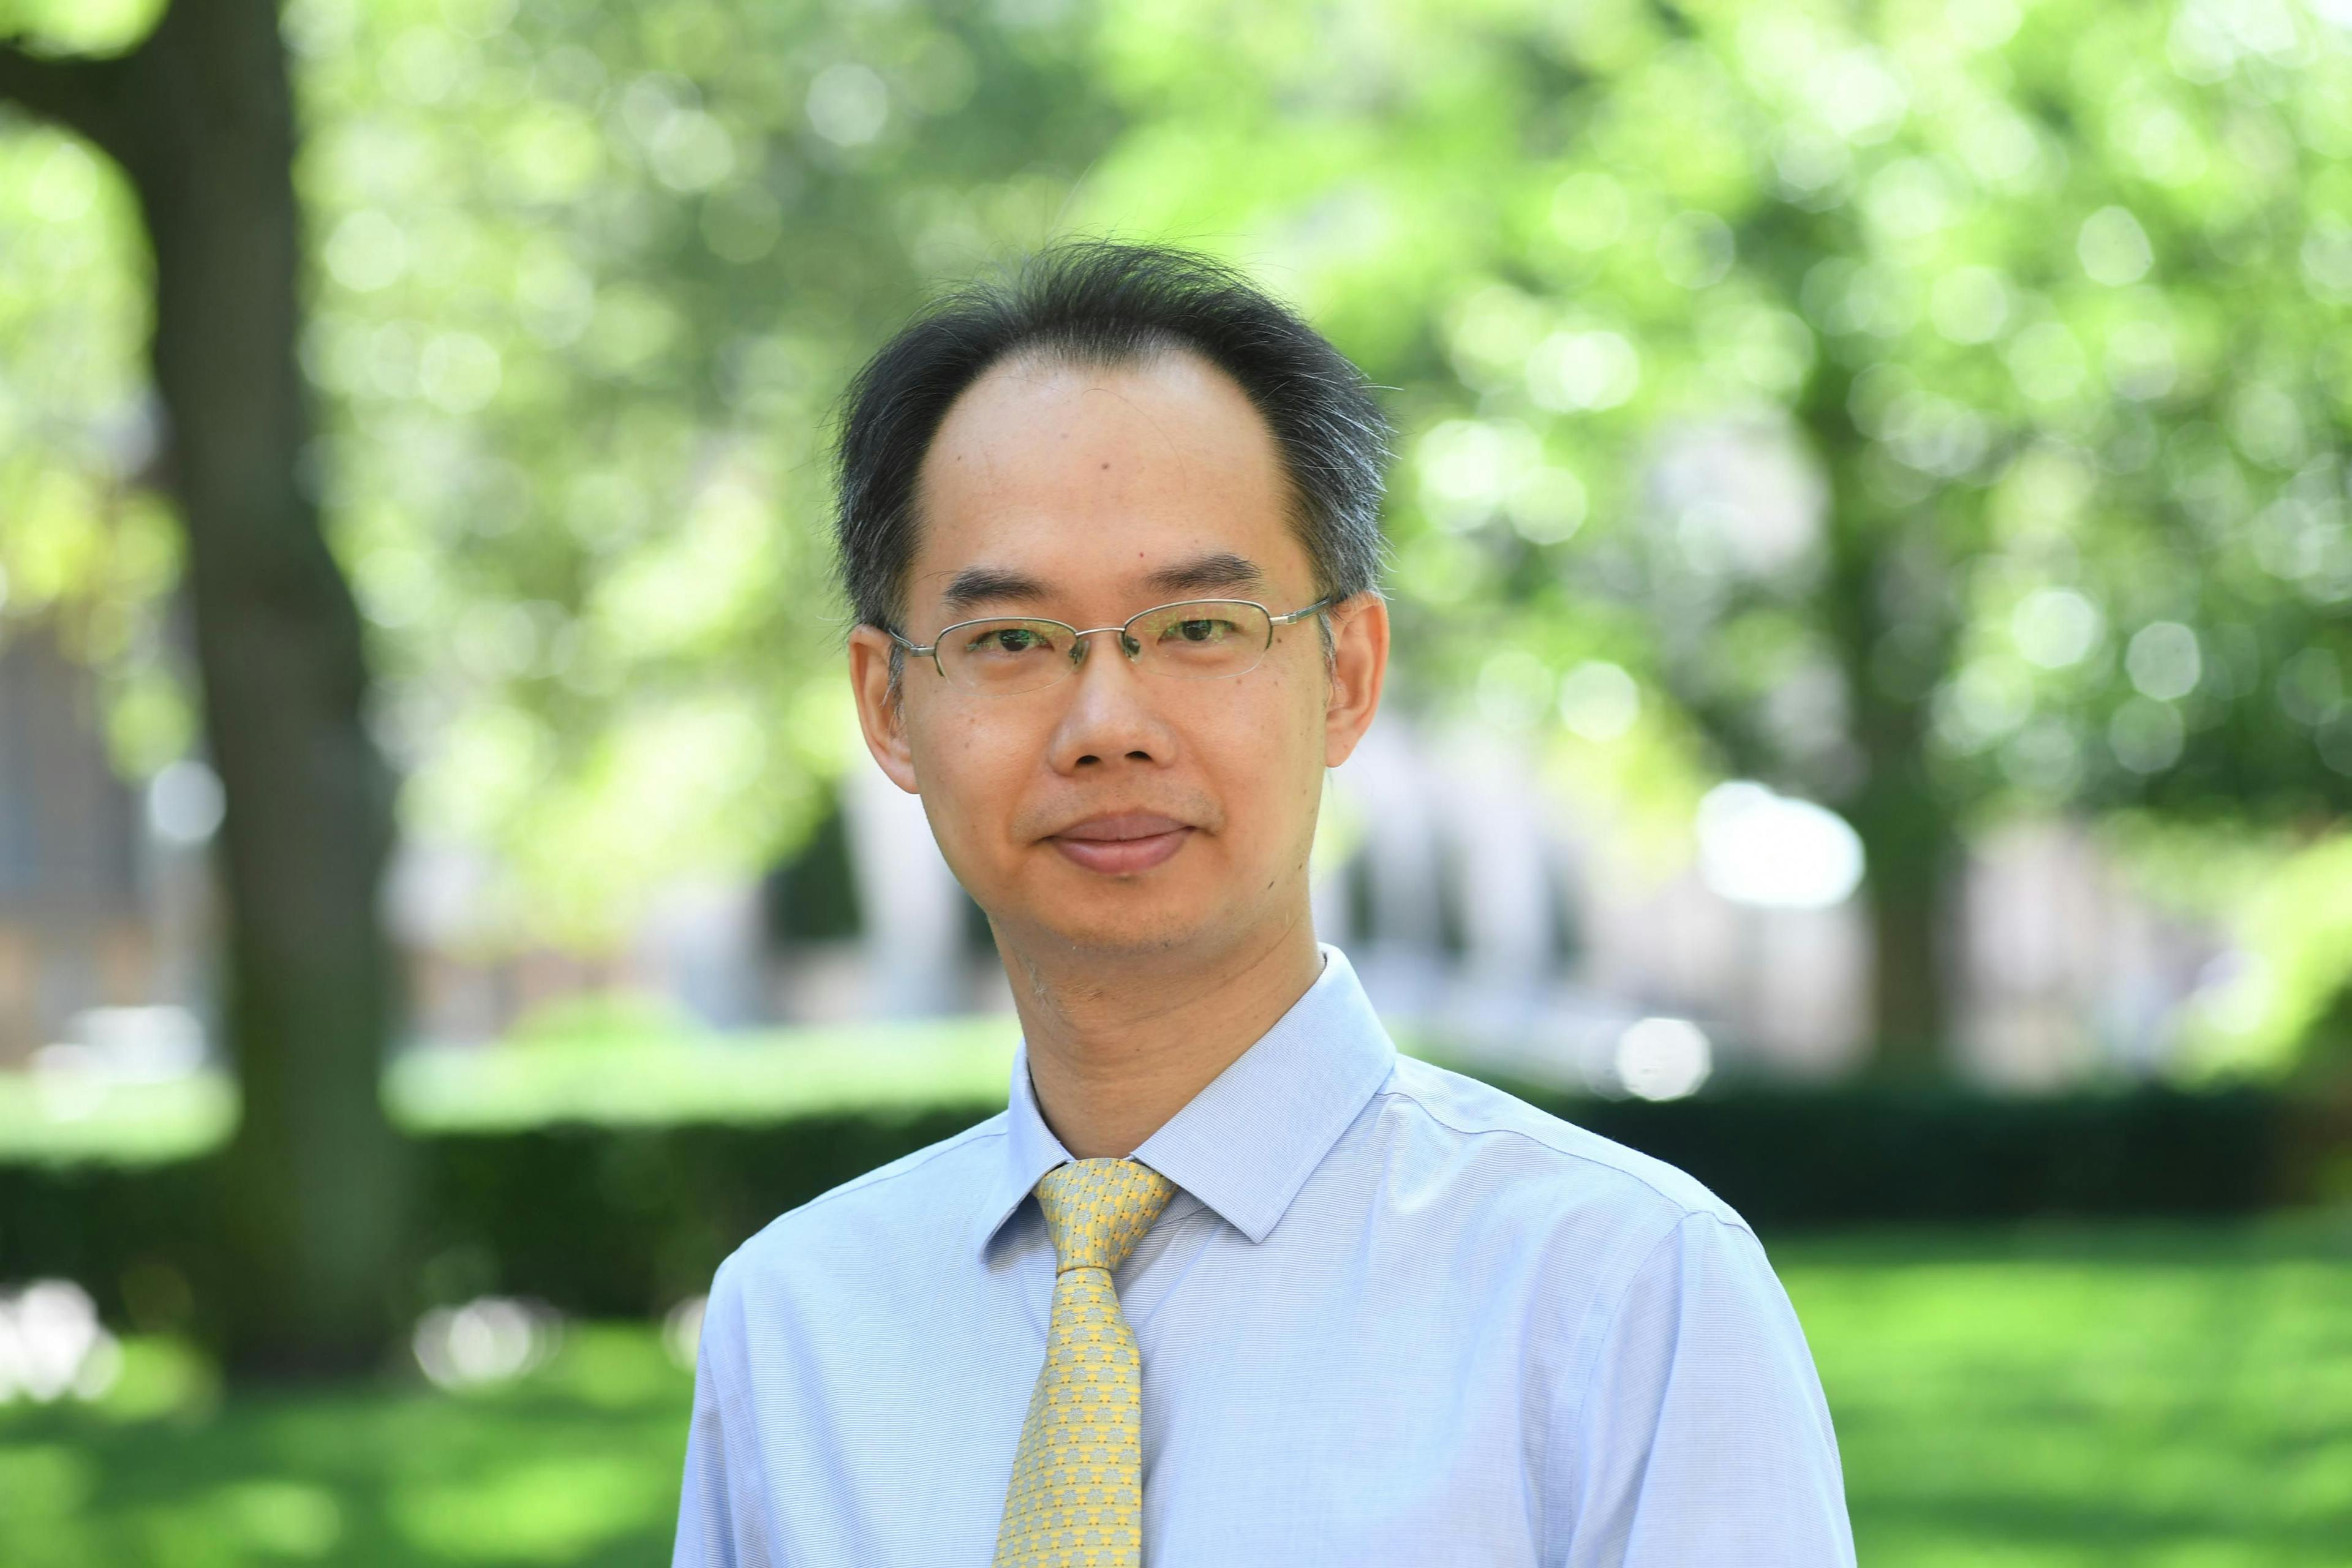 Wei Min to Receive 2022 Craver Award at SciX 2022